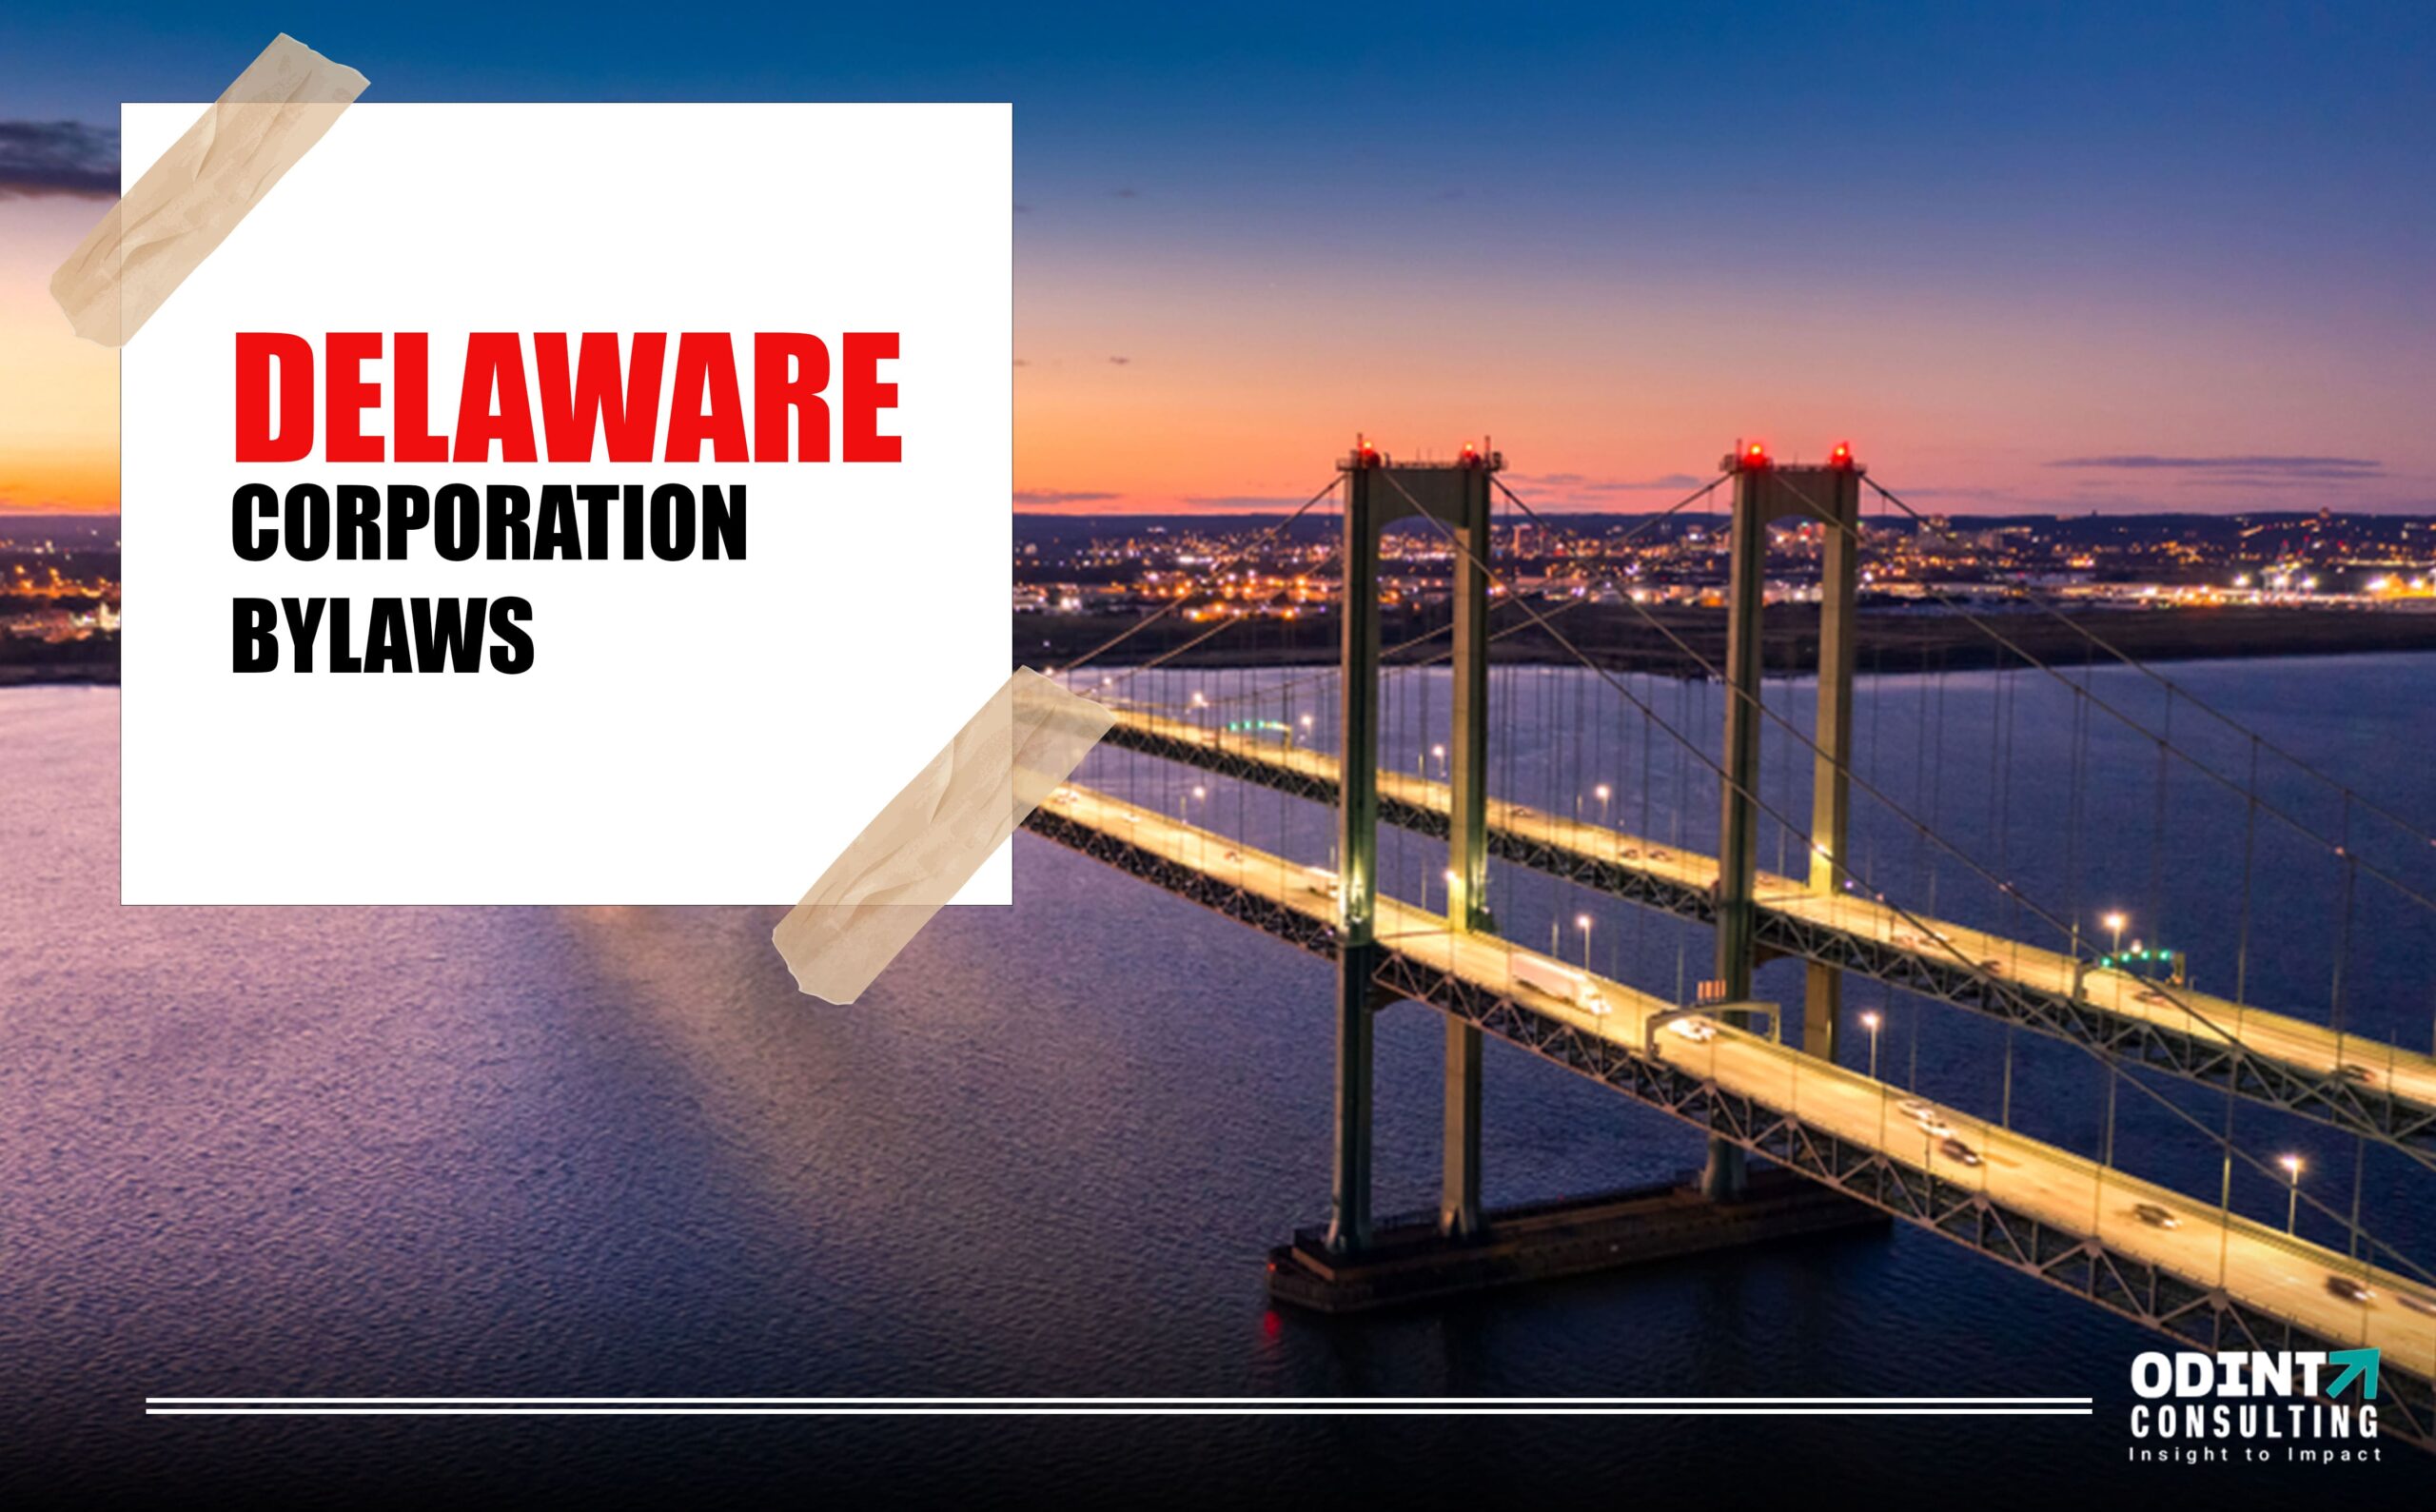 Delaware Corporation Bylaws: Purpose & Areas To Be Addressed